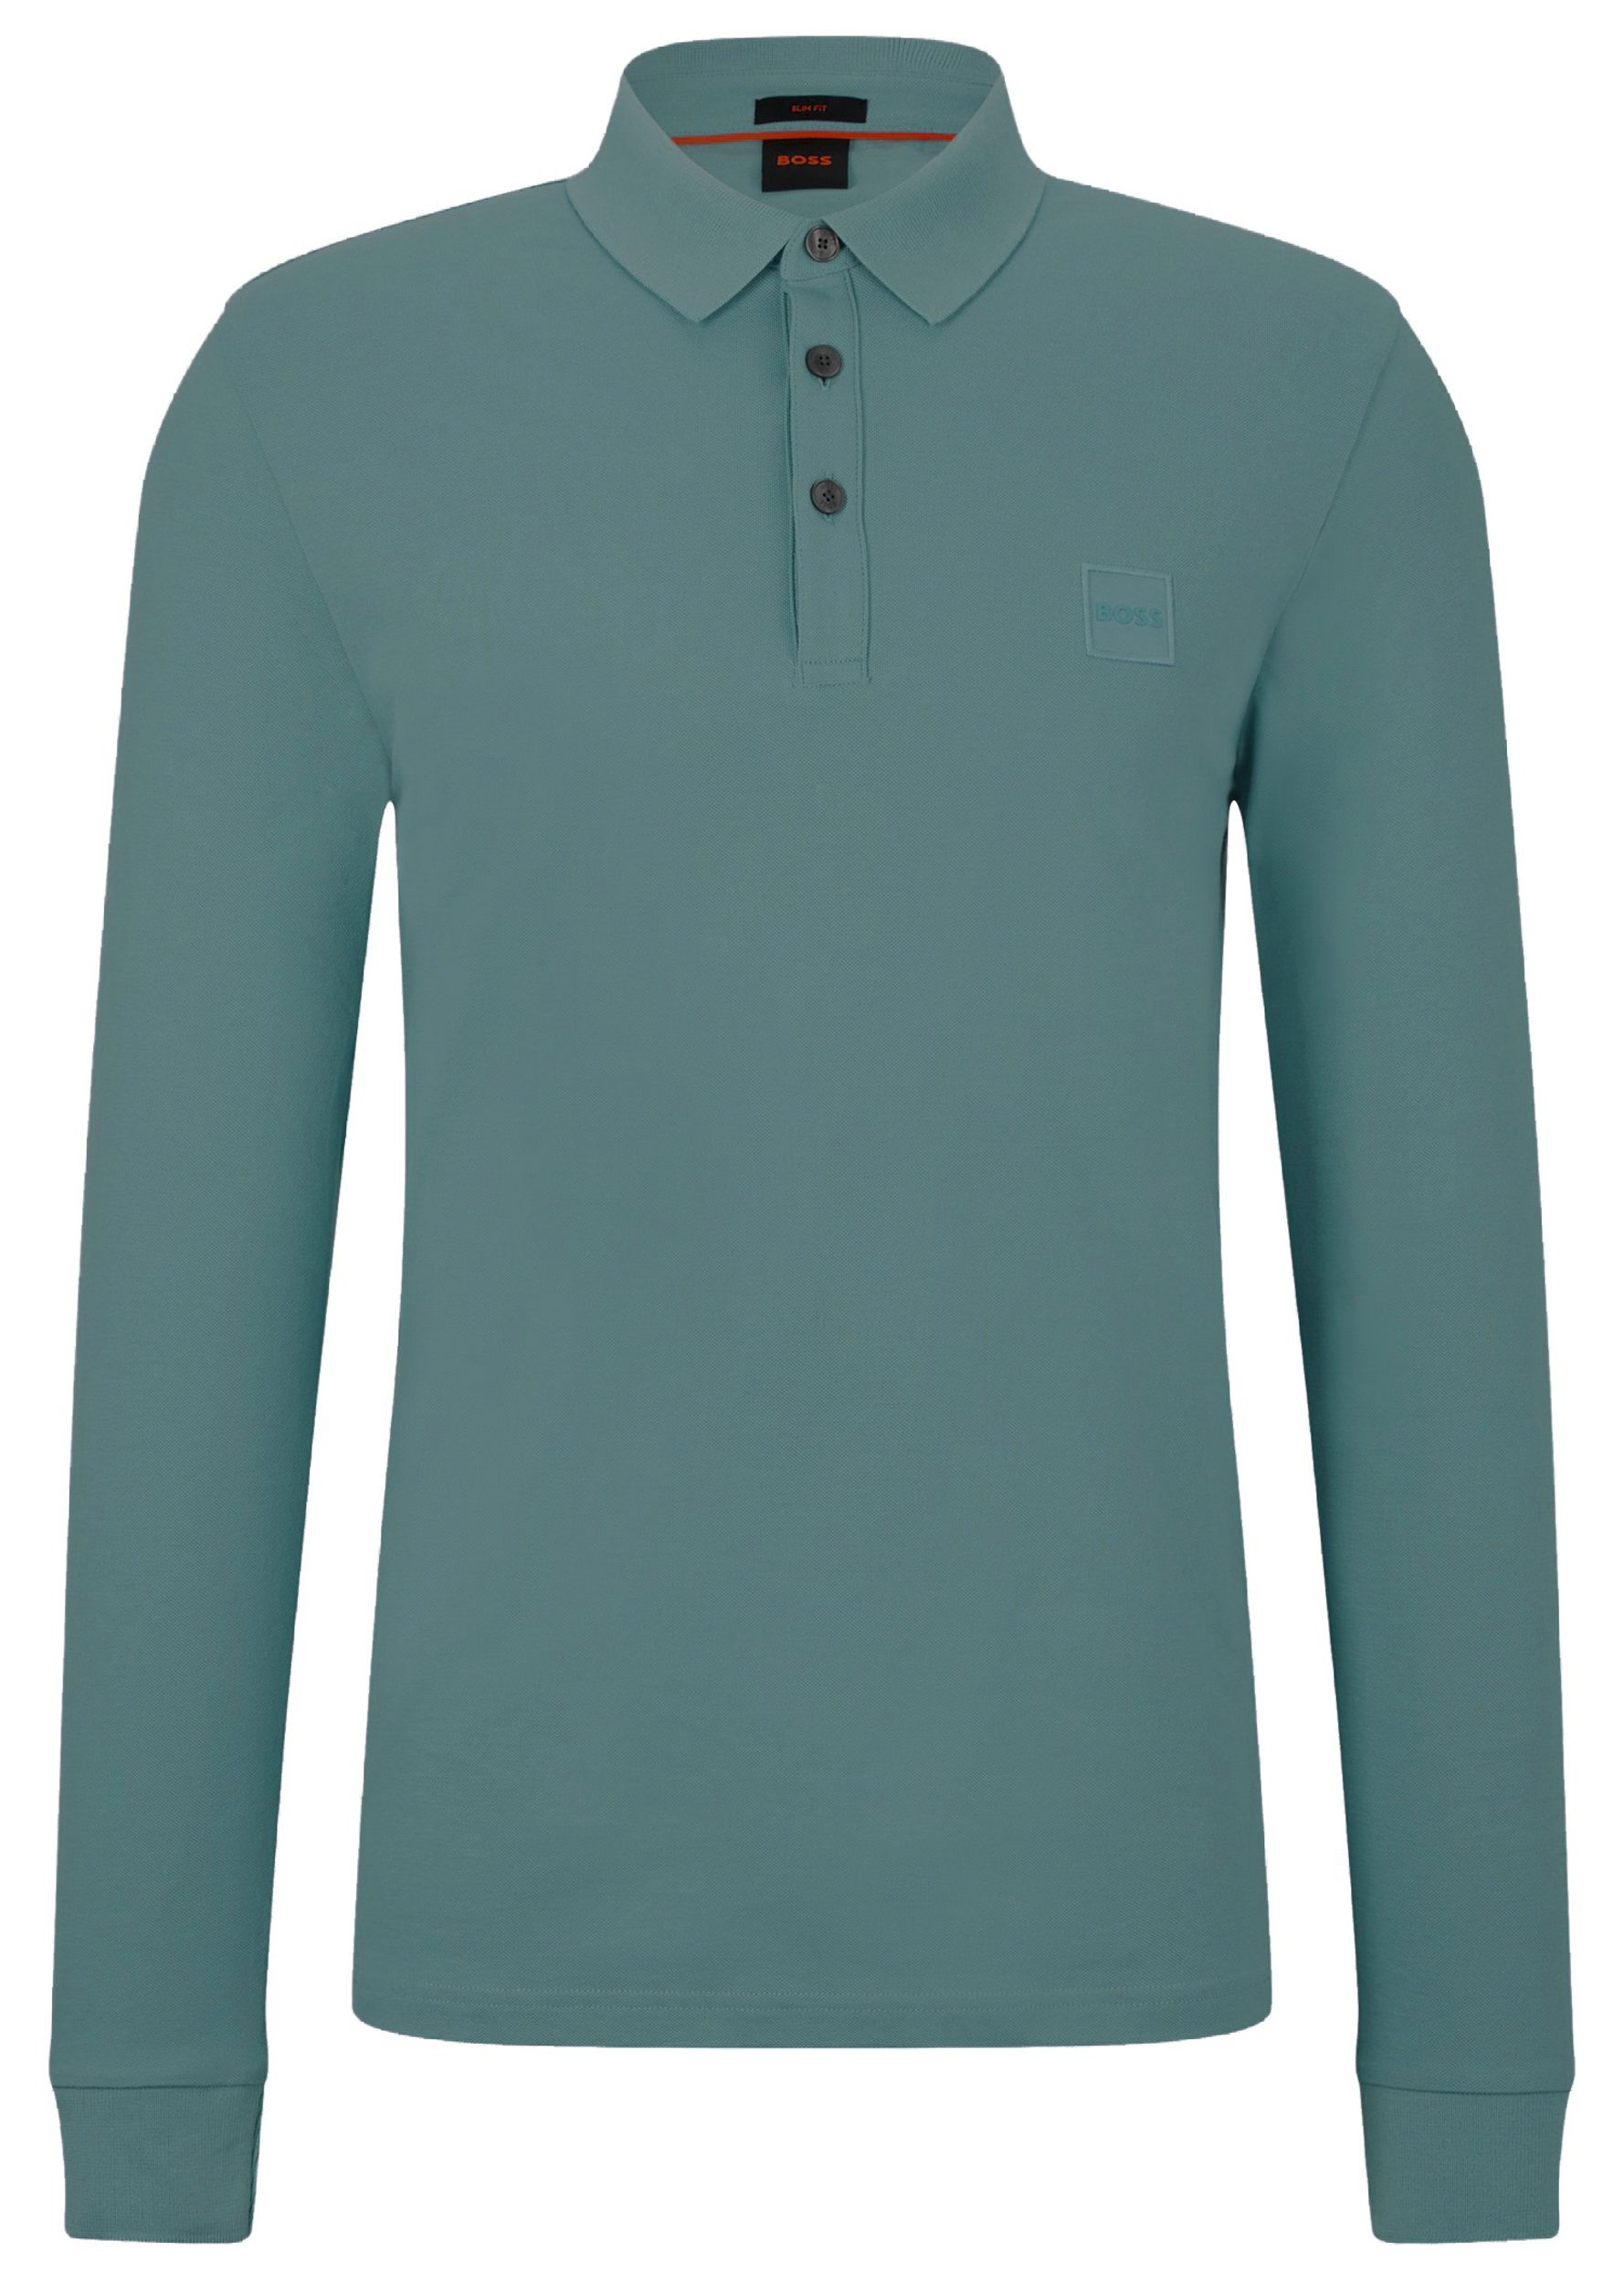 Hugo Boss Casual Passerby Polo LM Groen 082409-001-L